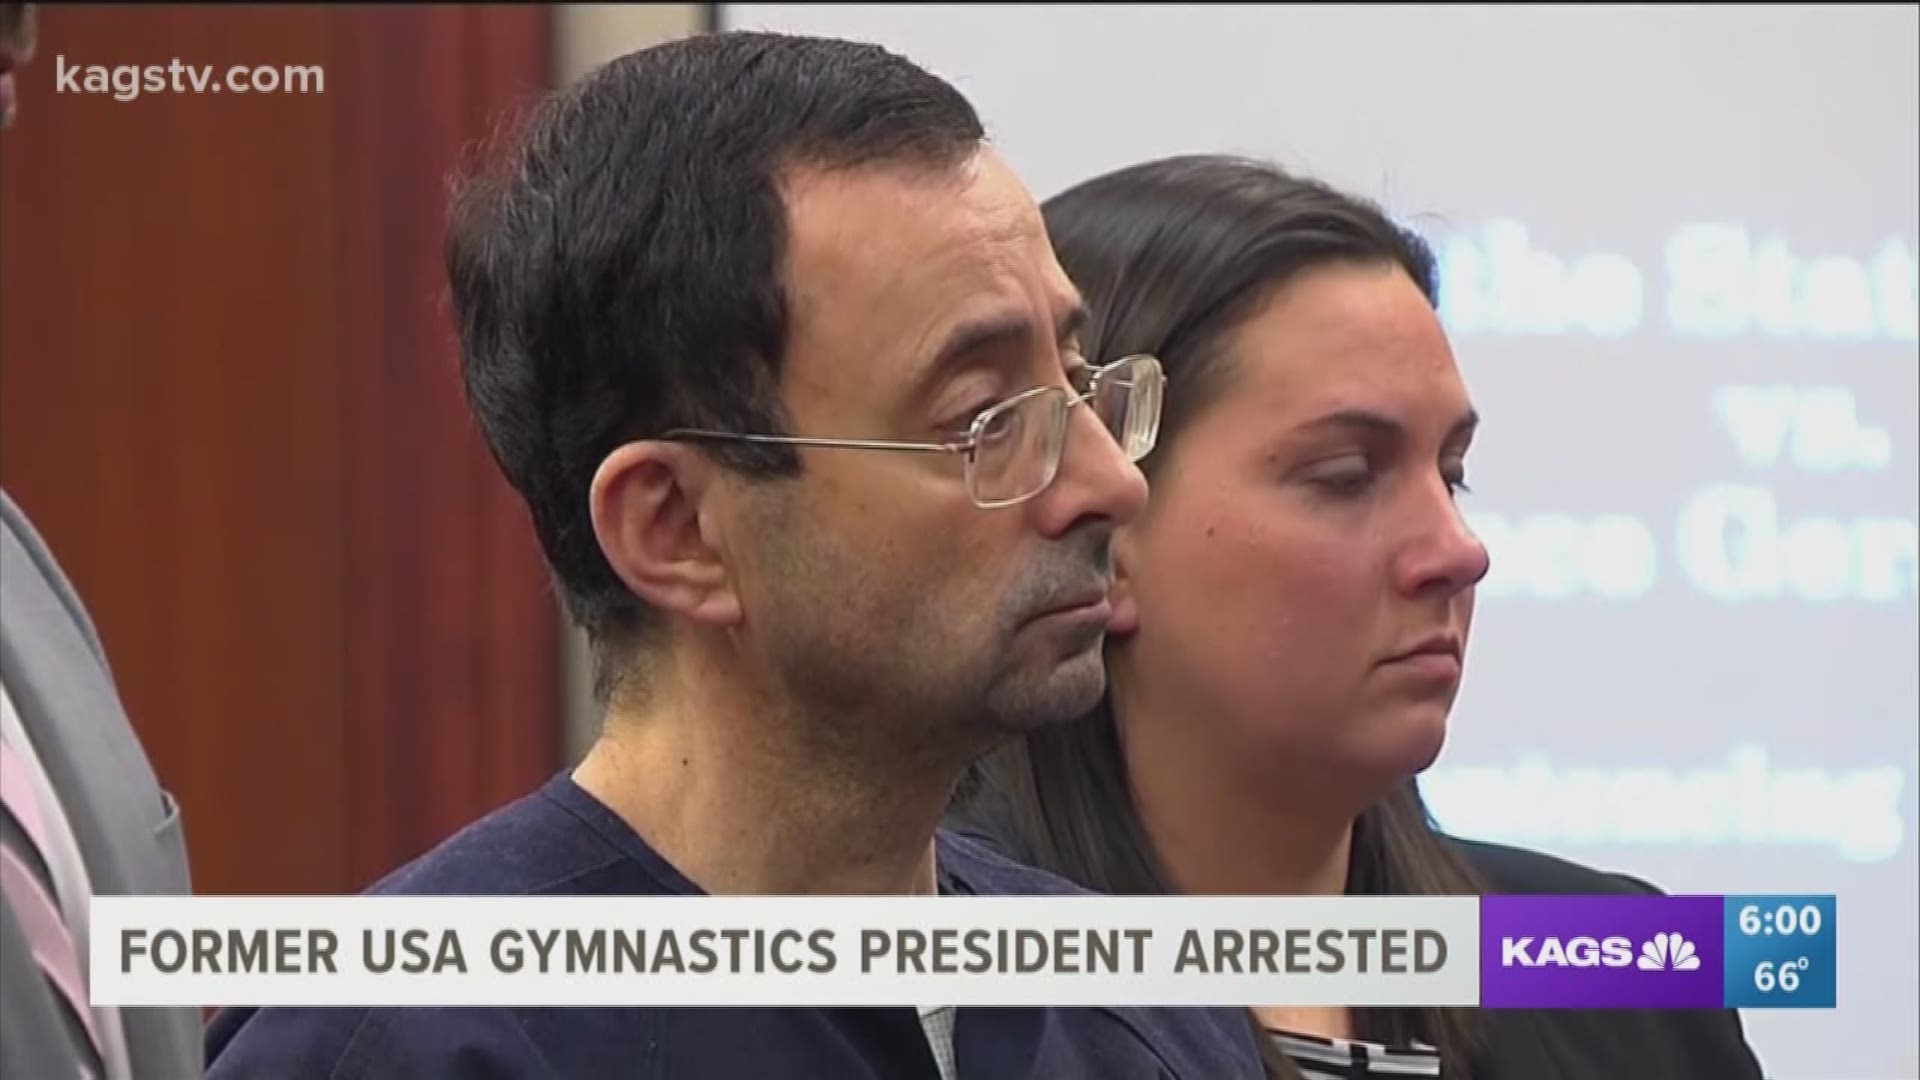 The former President of USA gymnastics is awaiting extradition to Texas for his alleged role in the sexual assault case against Larry Nassar.